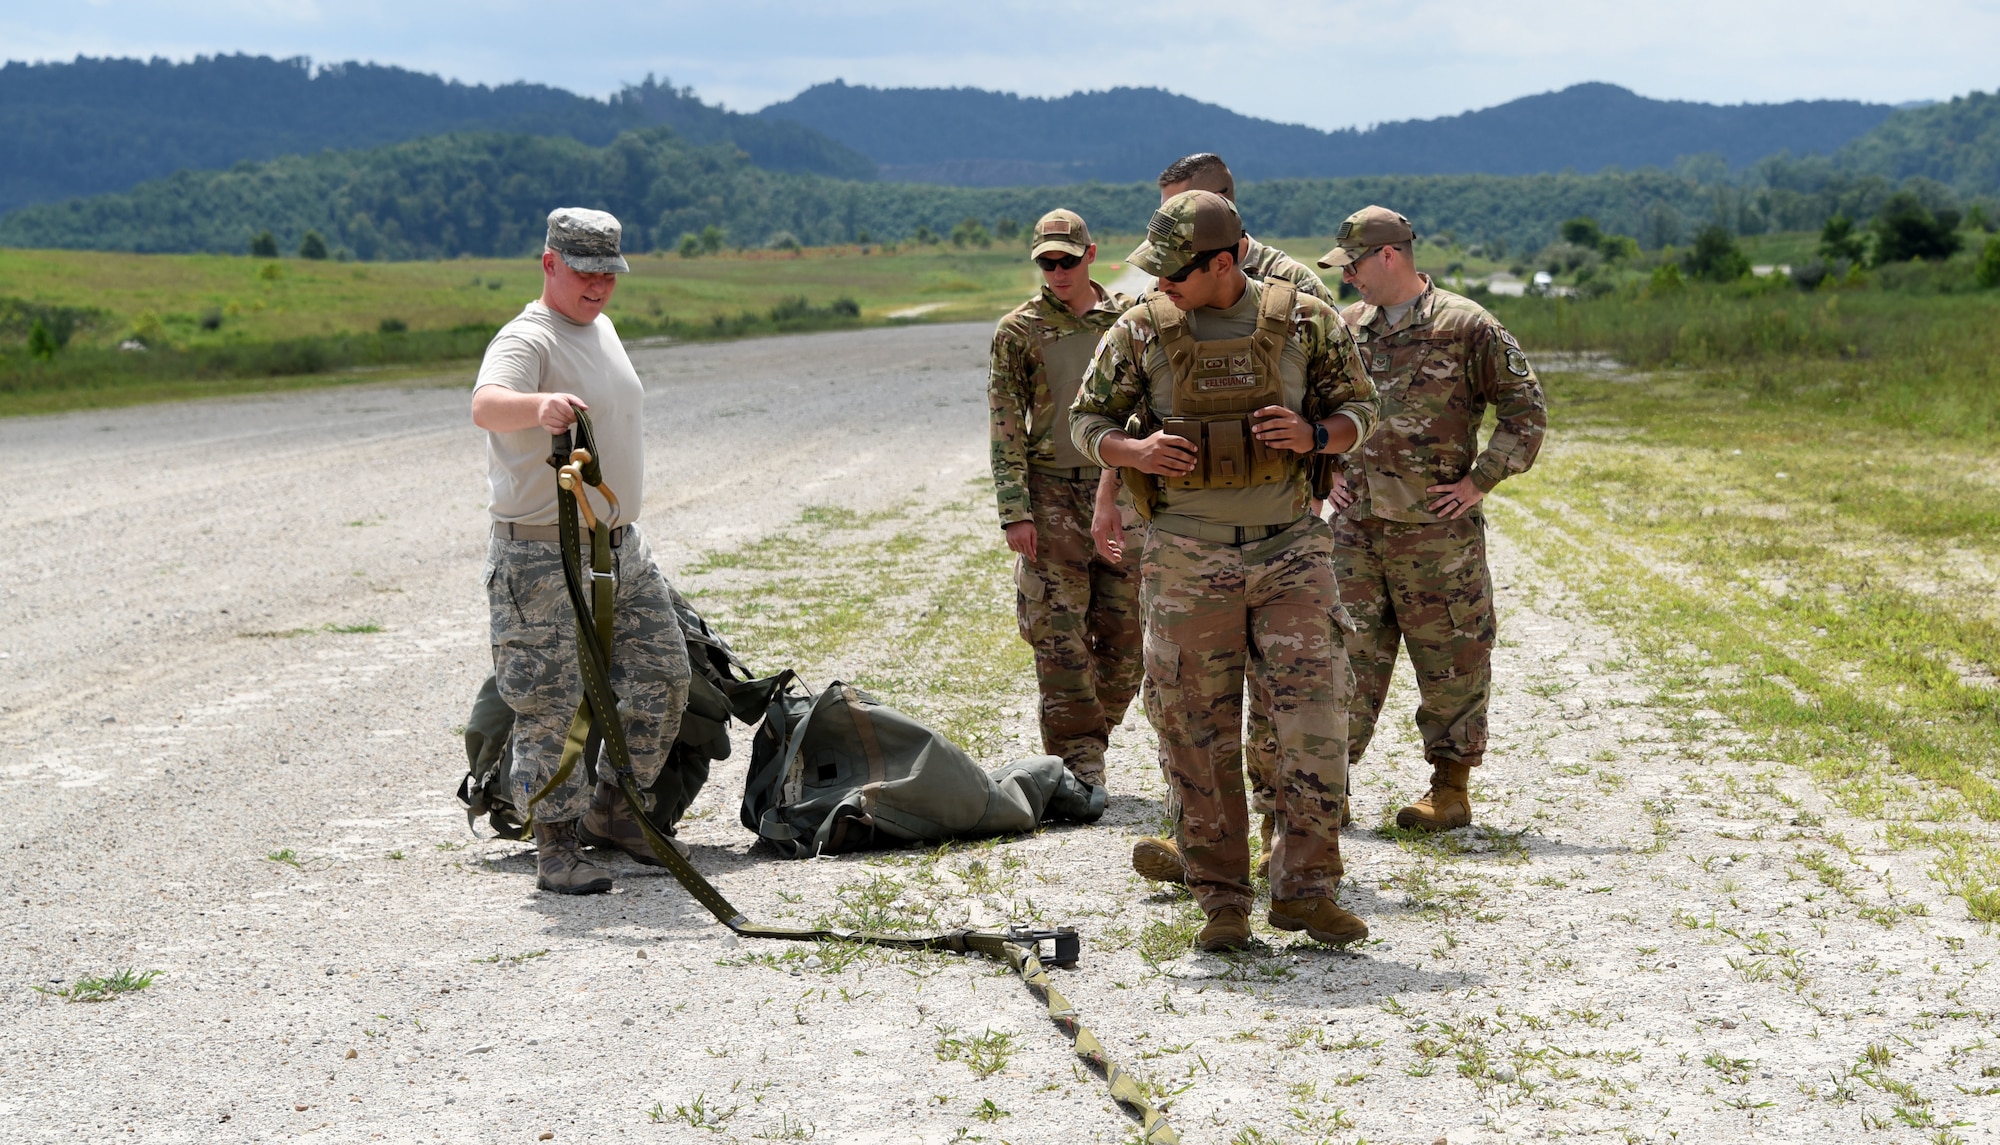 Airmen with the 621st Contingency Response Group work alongside the 130th Air National Guard to retrieve air drops at Camp Branch in Logan County, W.Va., Aug. 21, 2018. The 621st CRG spent four days training with and working with the 130th ANG at Camp Branch practicing semi-prepared runway operations. (U.S. Air Force photo by Tech. Sgt. Jamie Powell)